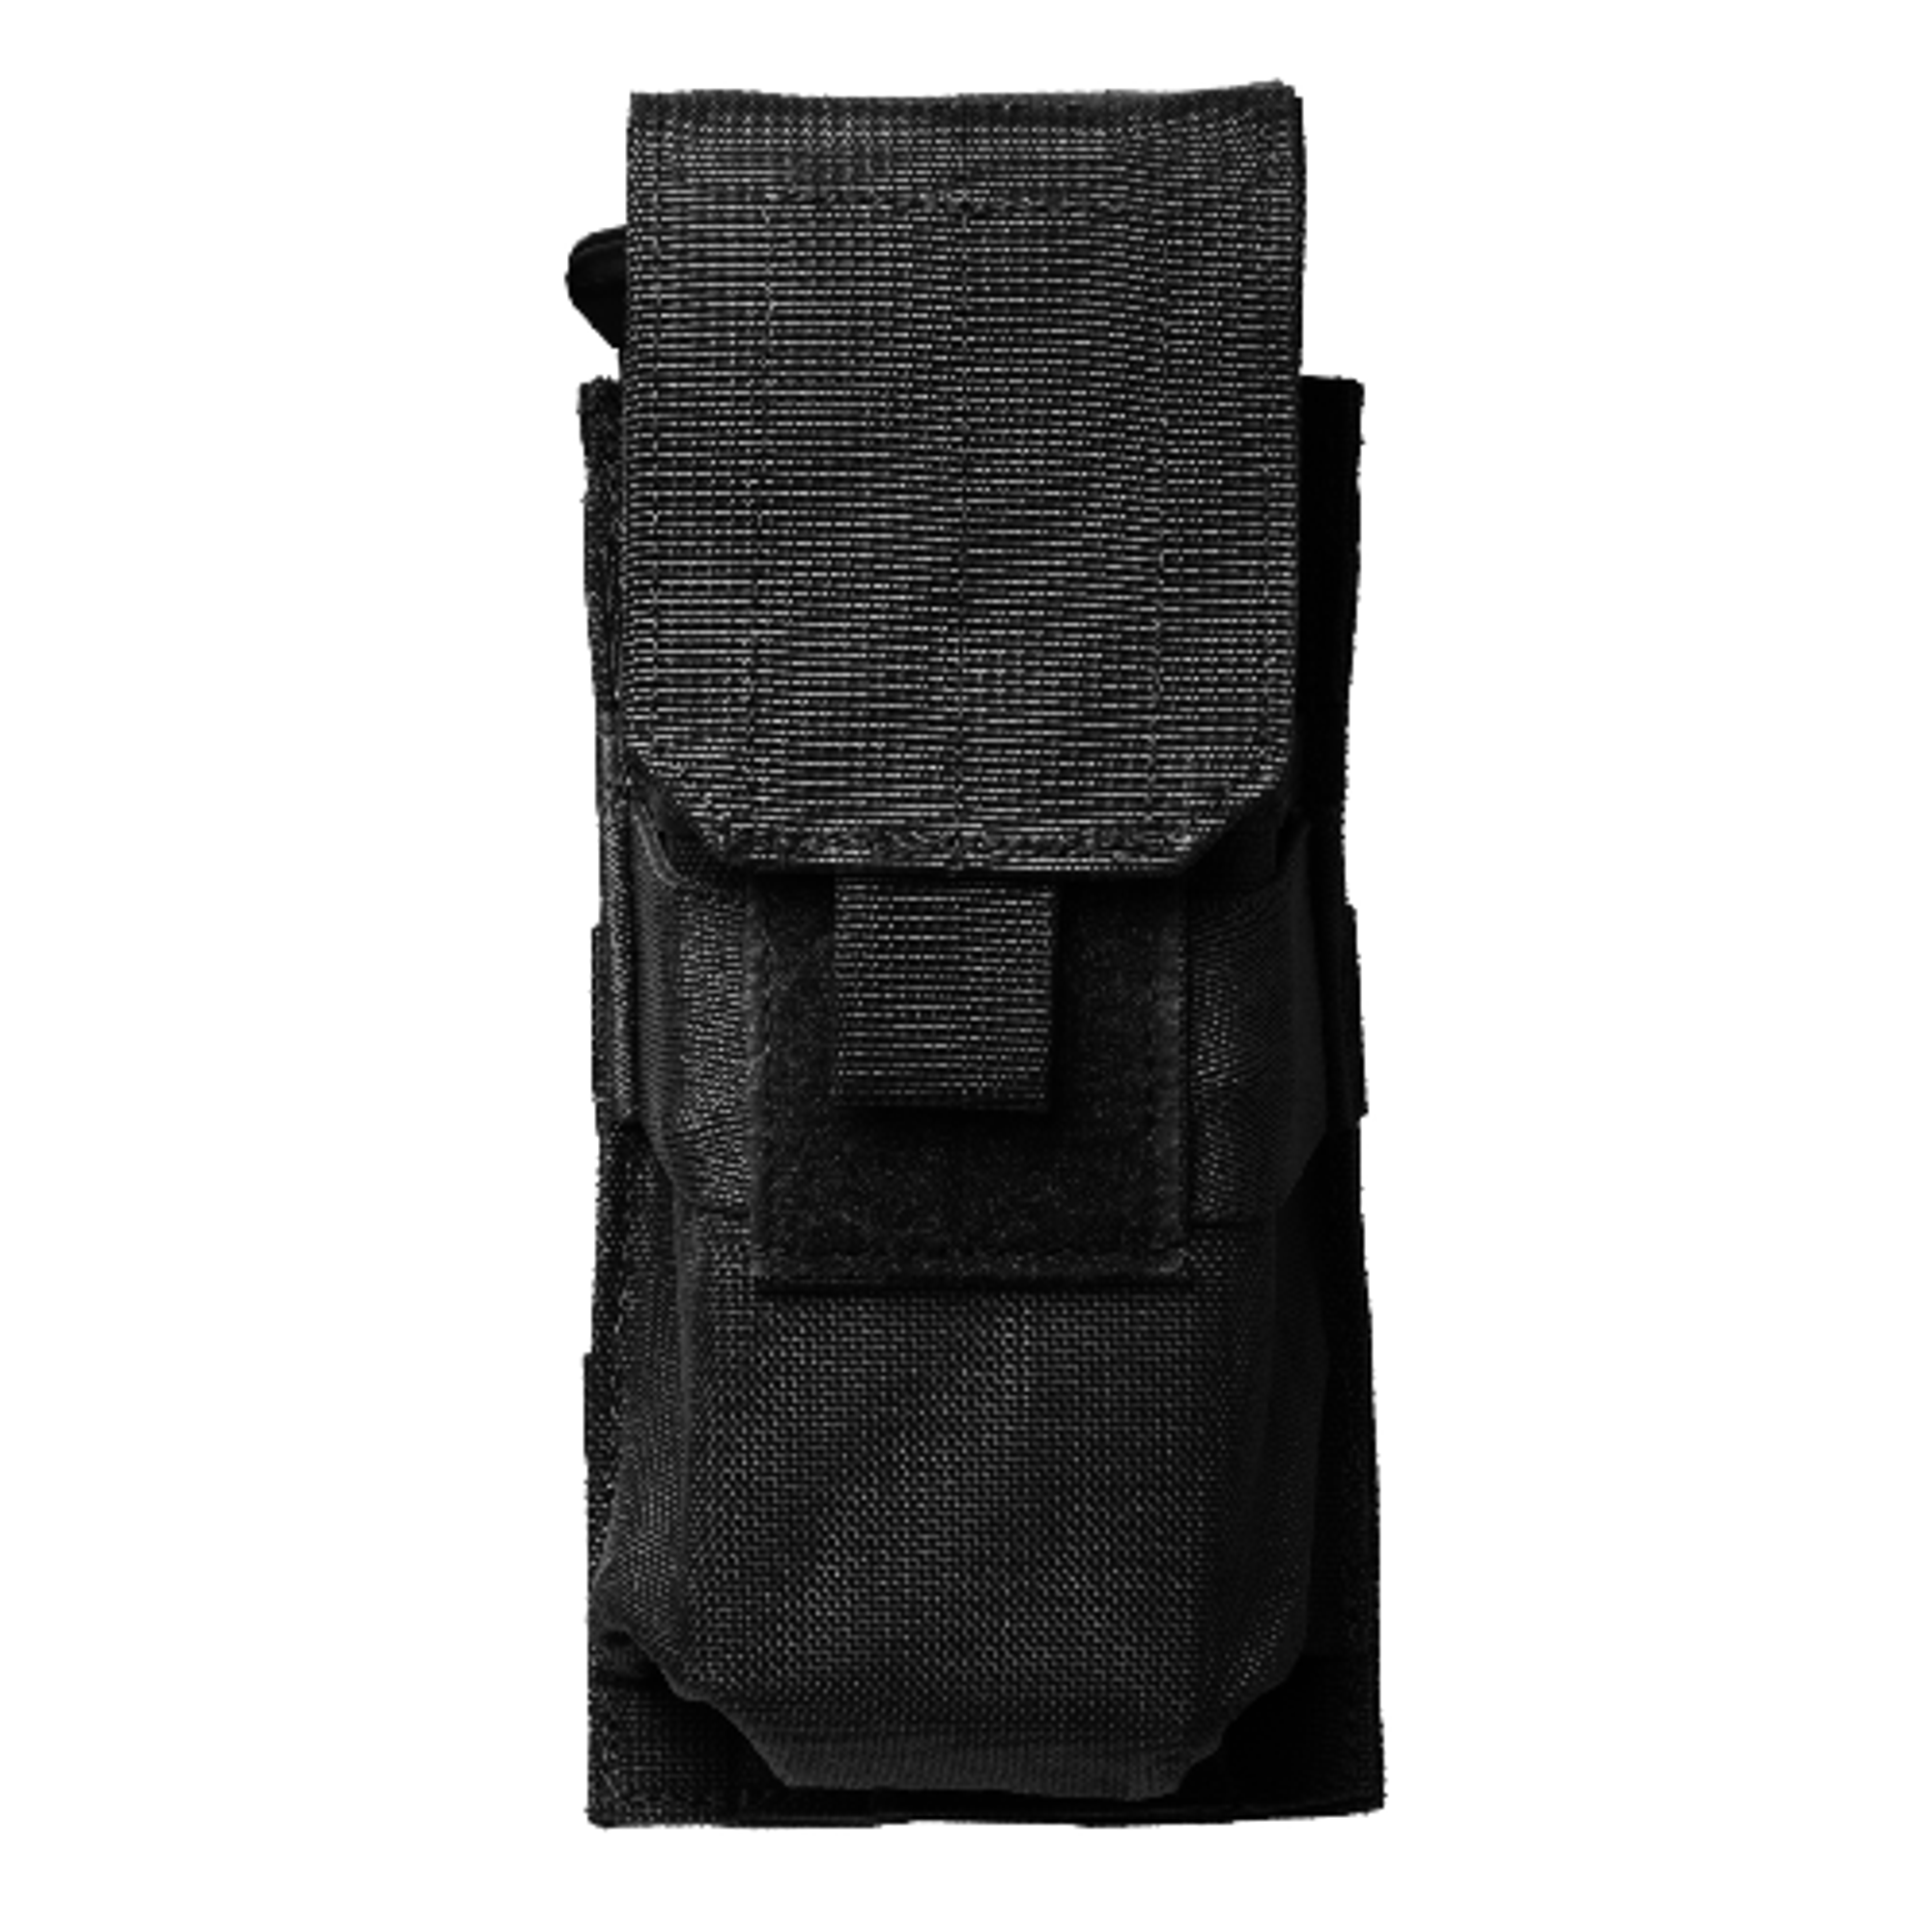 M4/m16 Single Mag Pouch